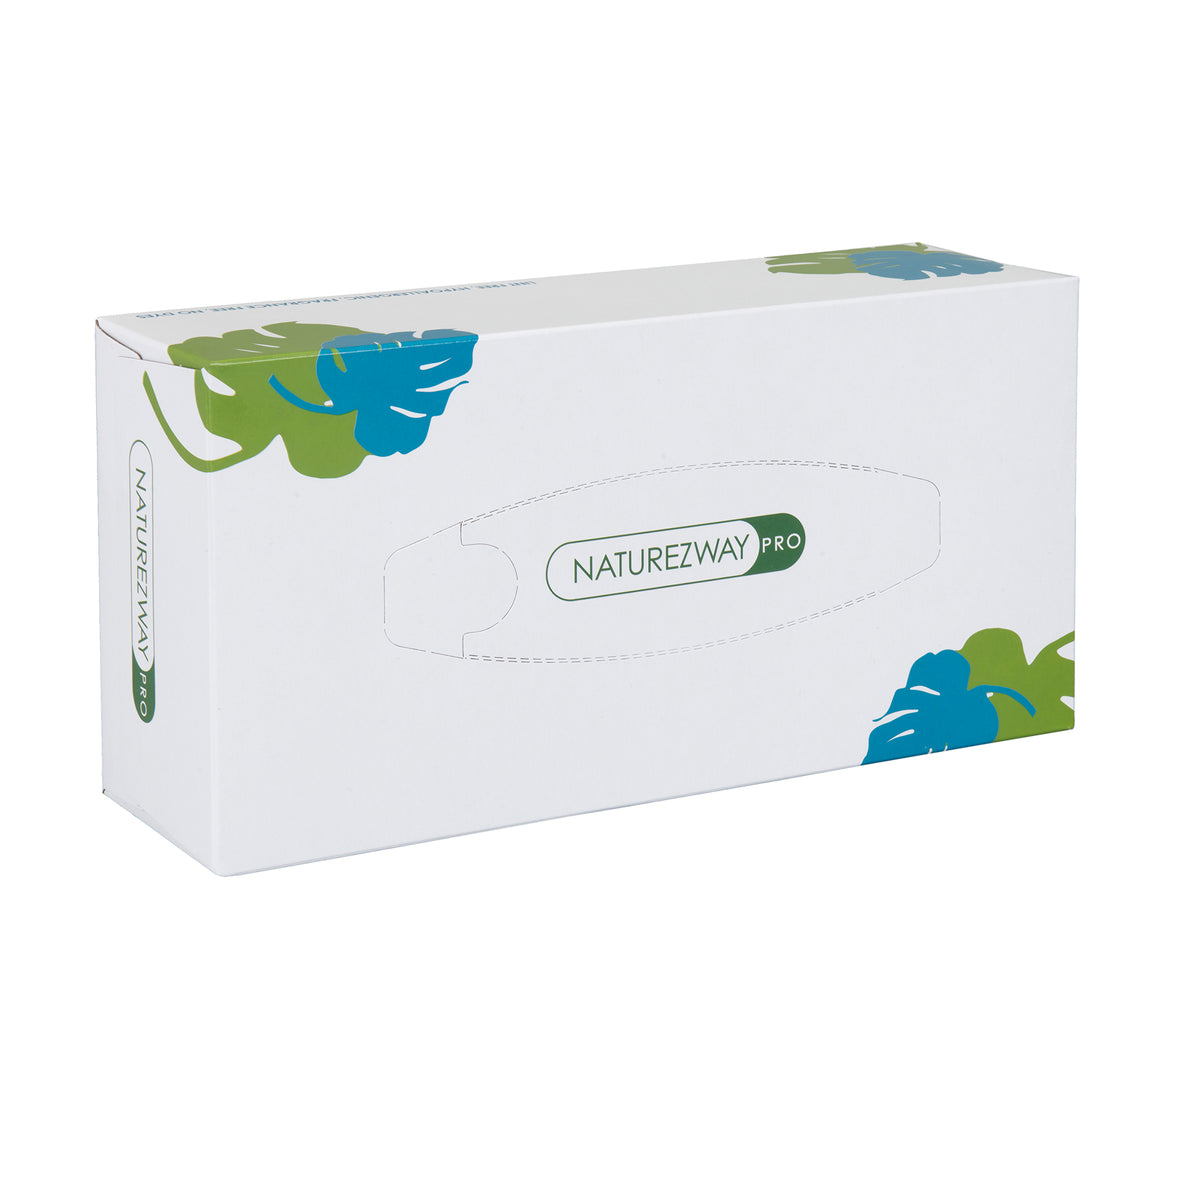 Bamboo Tissues - 12 Boxes of 100% Bamboo Facial Tissues – Cloud Paper